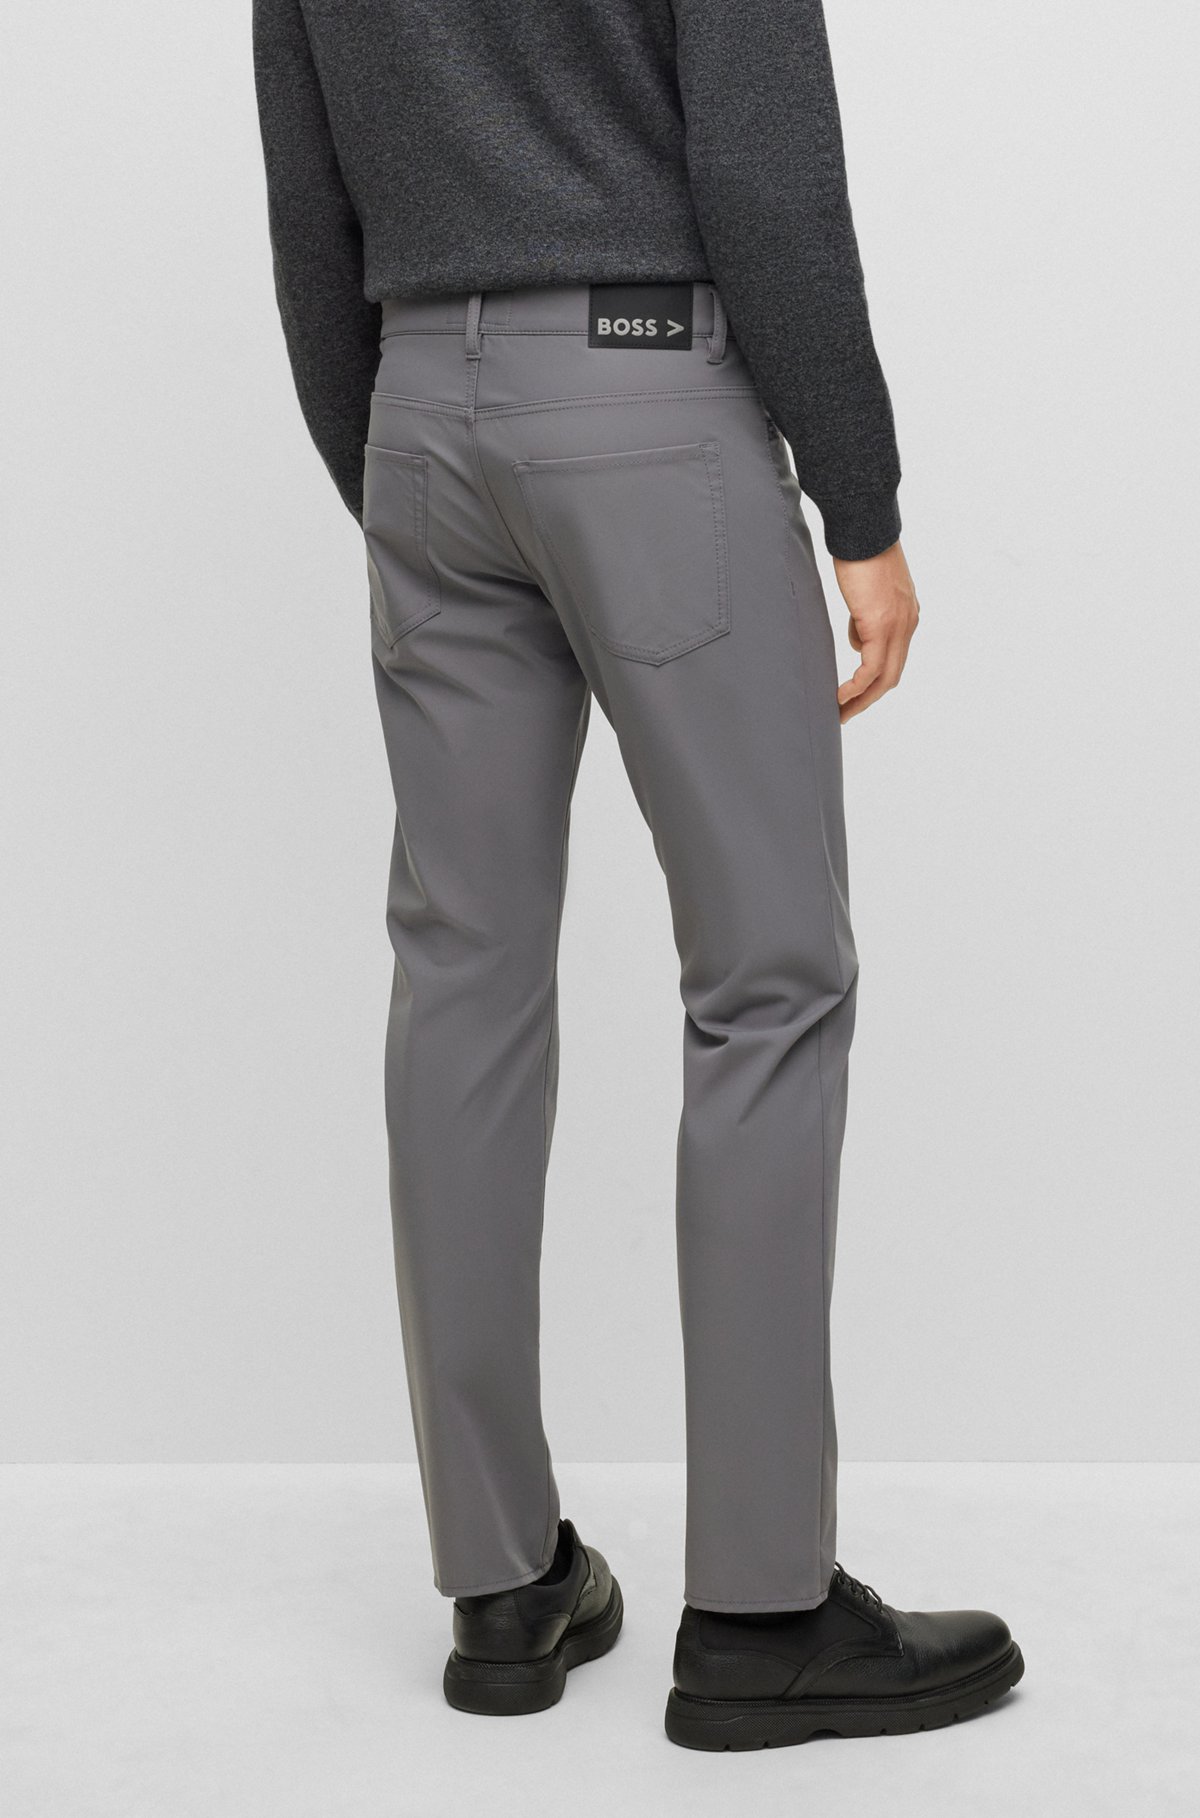 BOSS - Slim-fit jeans performance-stretch anti-crease